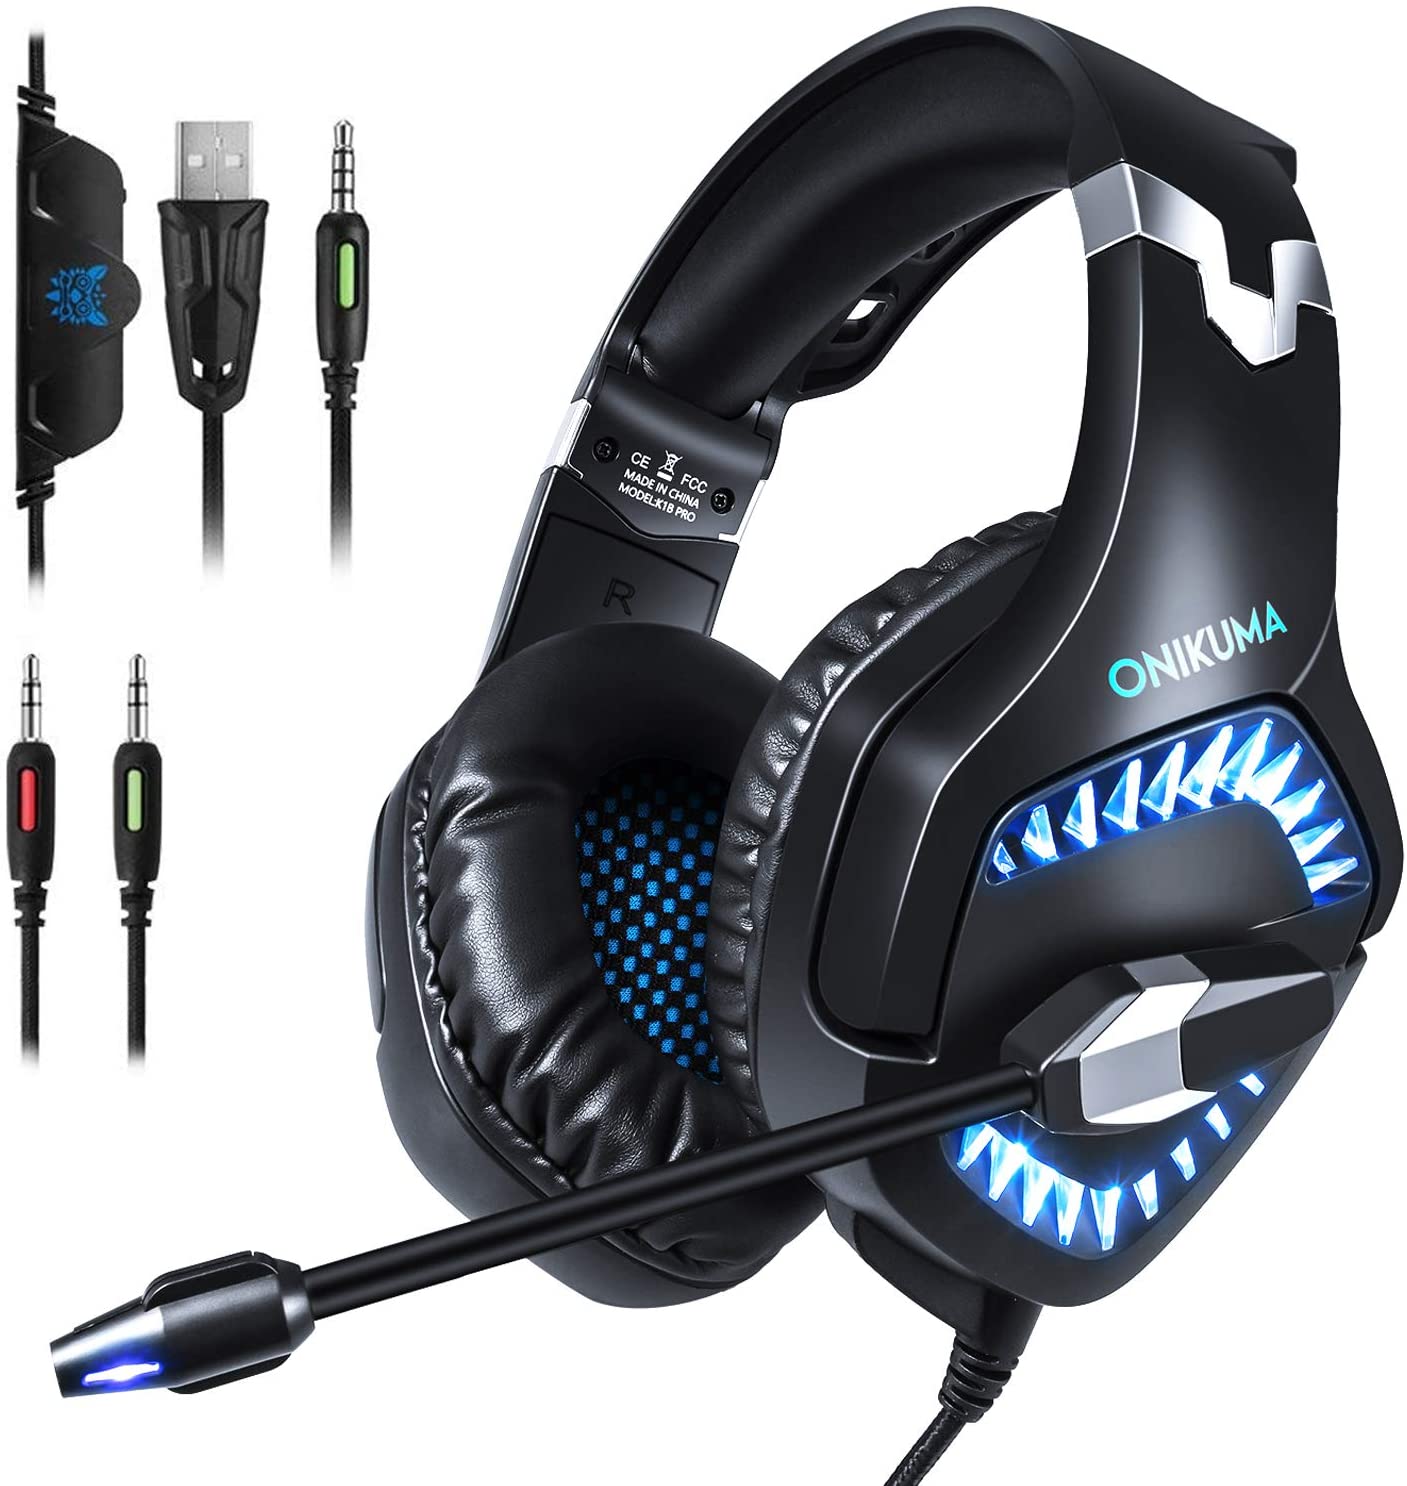 Gaming Headset,E-BLUE Xbox One PS4 Microsoft Gaming Headphone,Playstation Headset with Mic and Volume Control Stereo for Boys Girls (No adapter included)